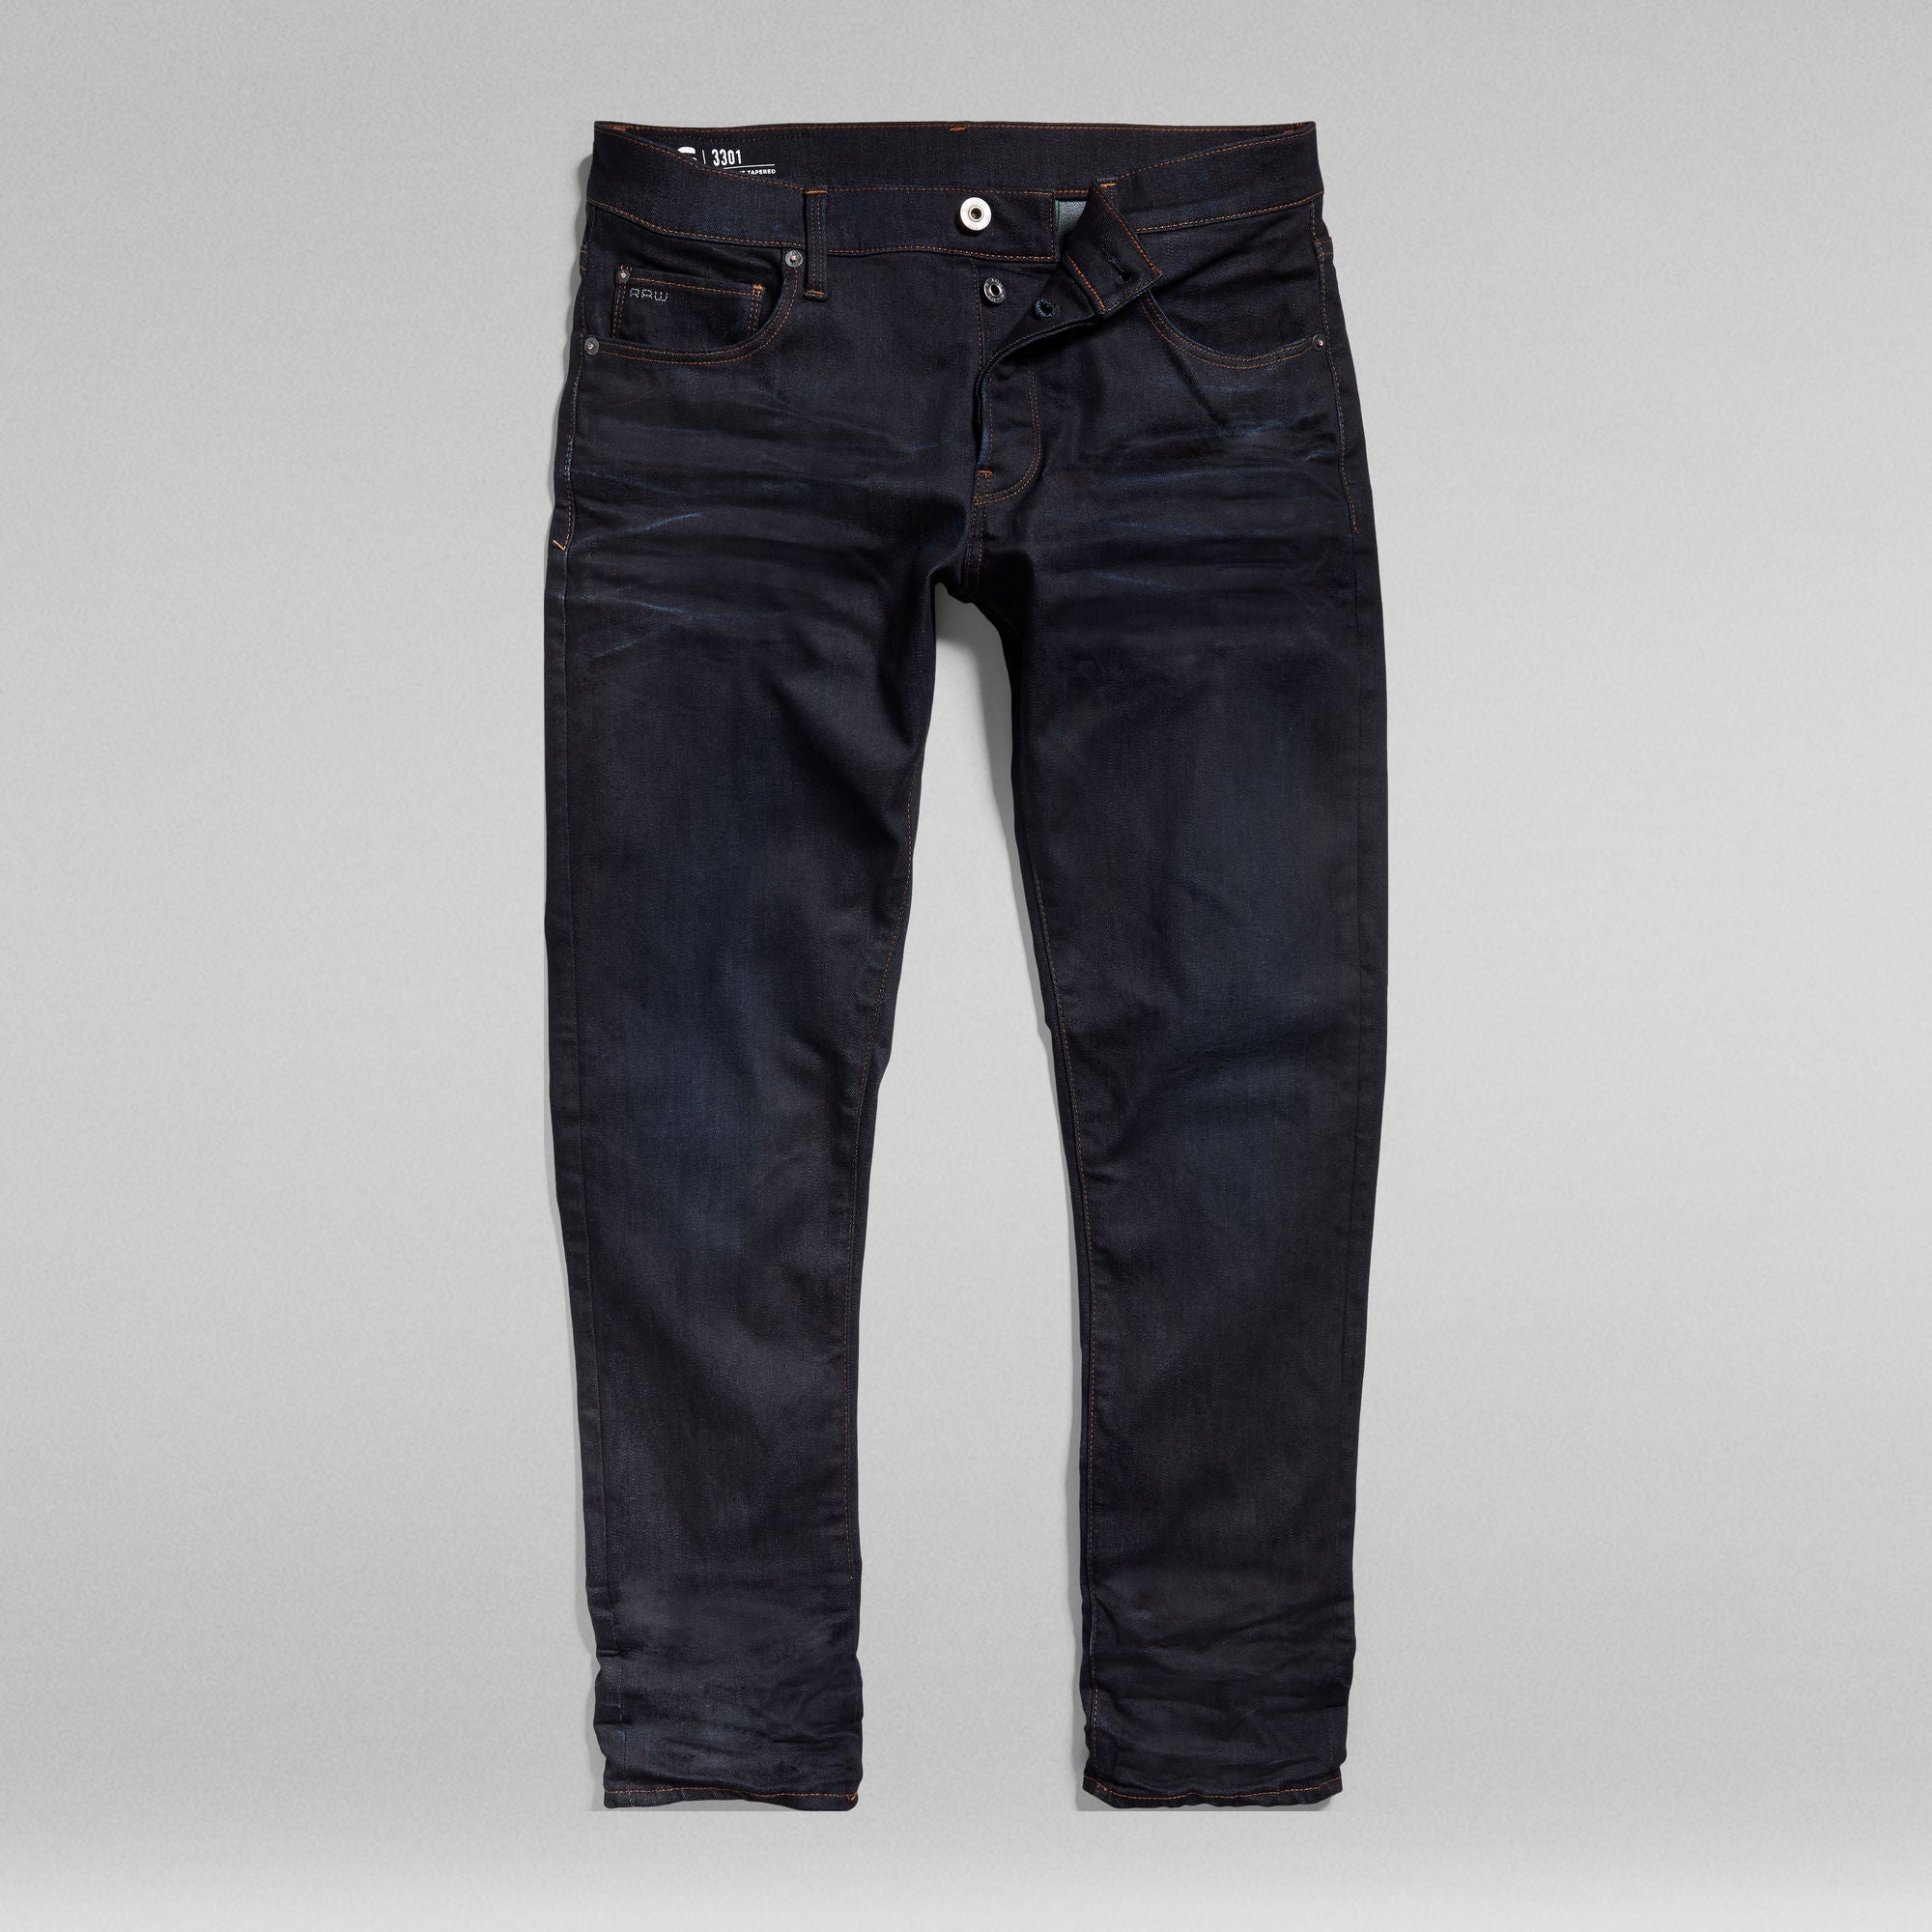 G-Star Raw - 3301 Straight Tapered Jeans - Dk Aged